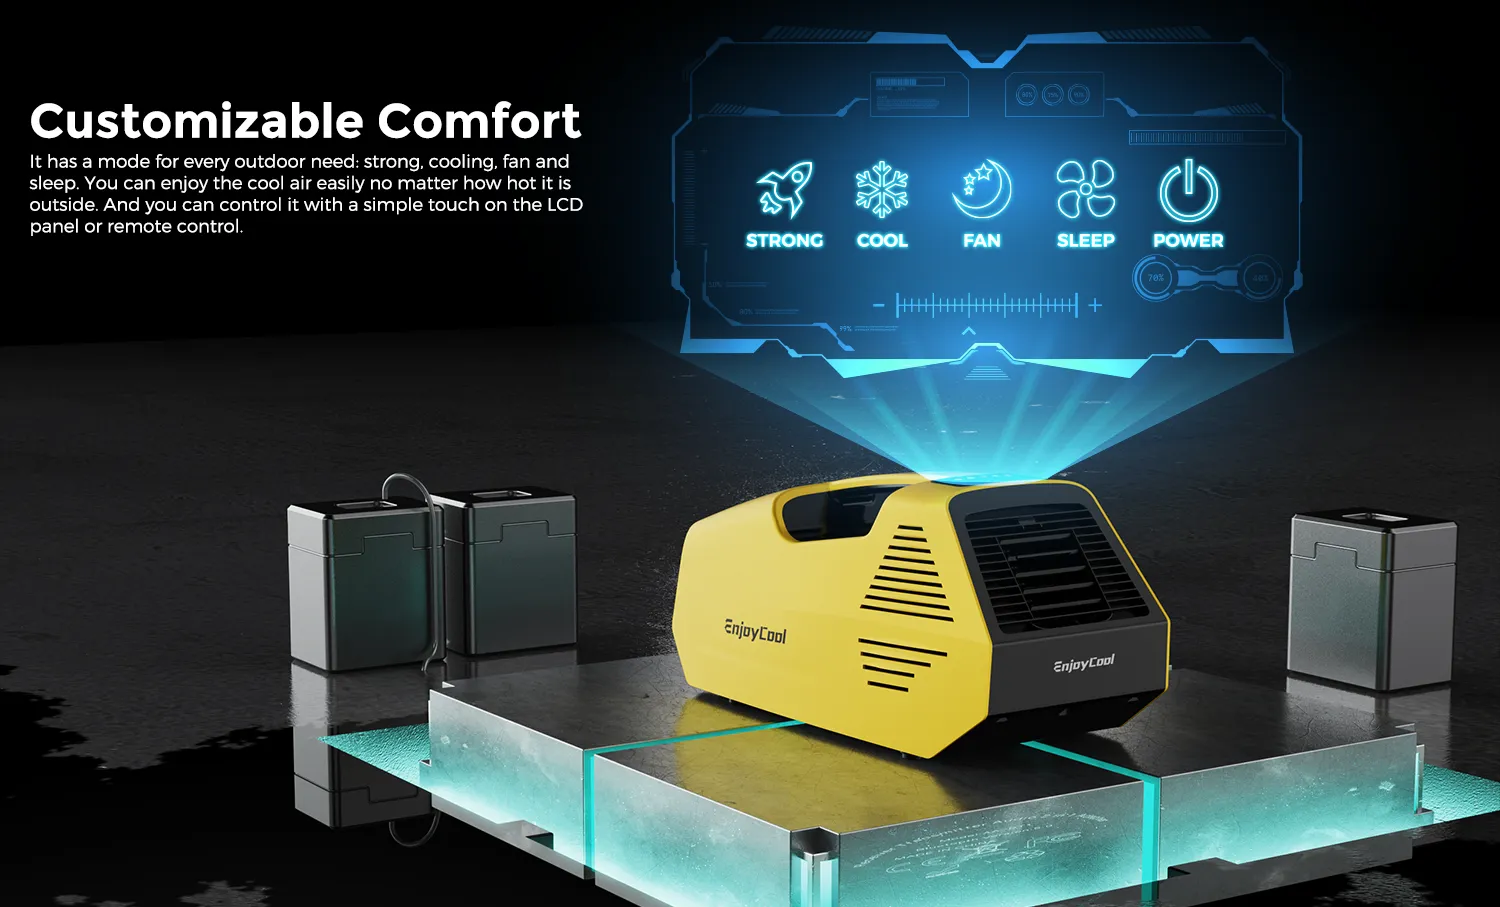 EnjoyCool Link2 Portable Outdoor Air Conditioner with Five Operation Mode